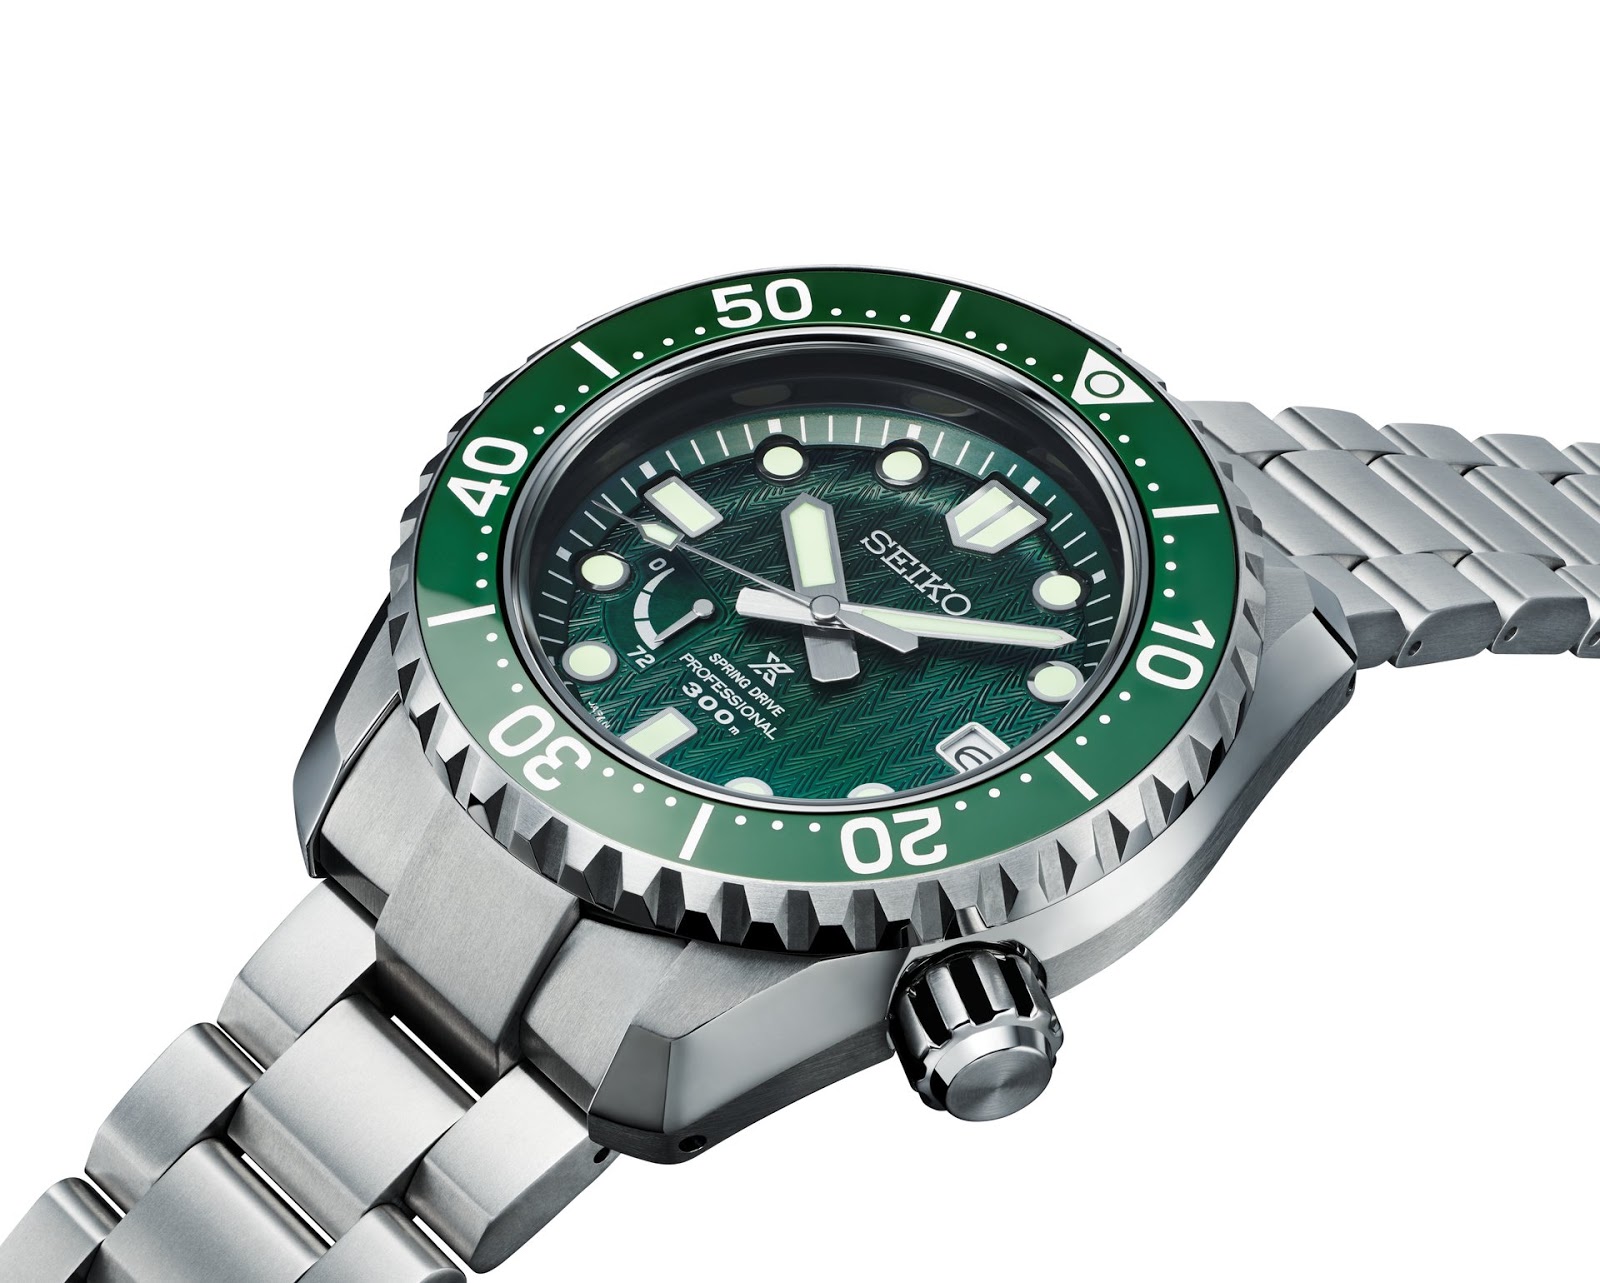 OceanicTime: Seiko PROSPEX LX line Limited Edition SPRING DRIVE